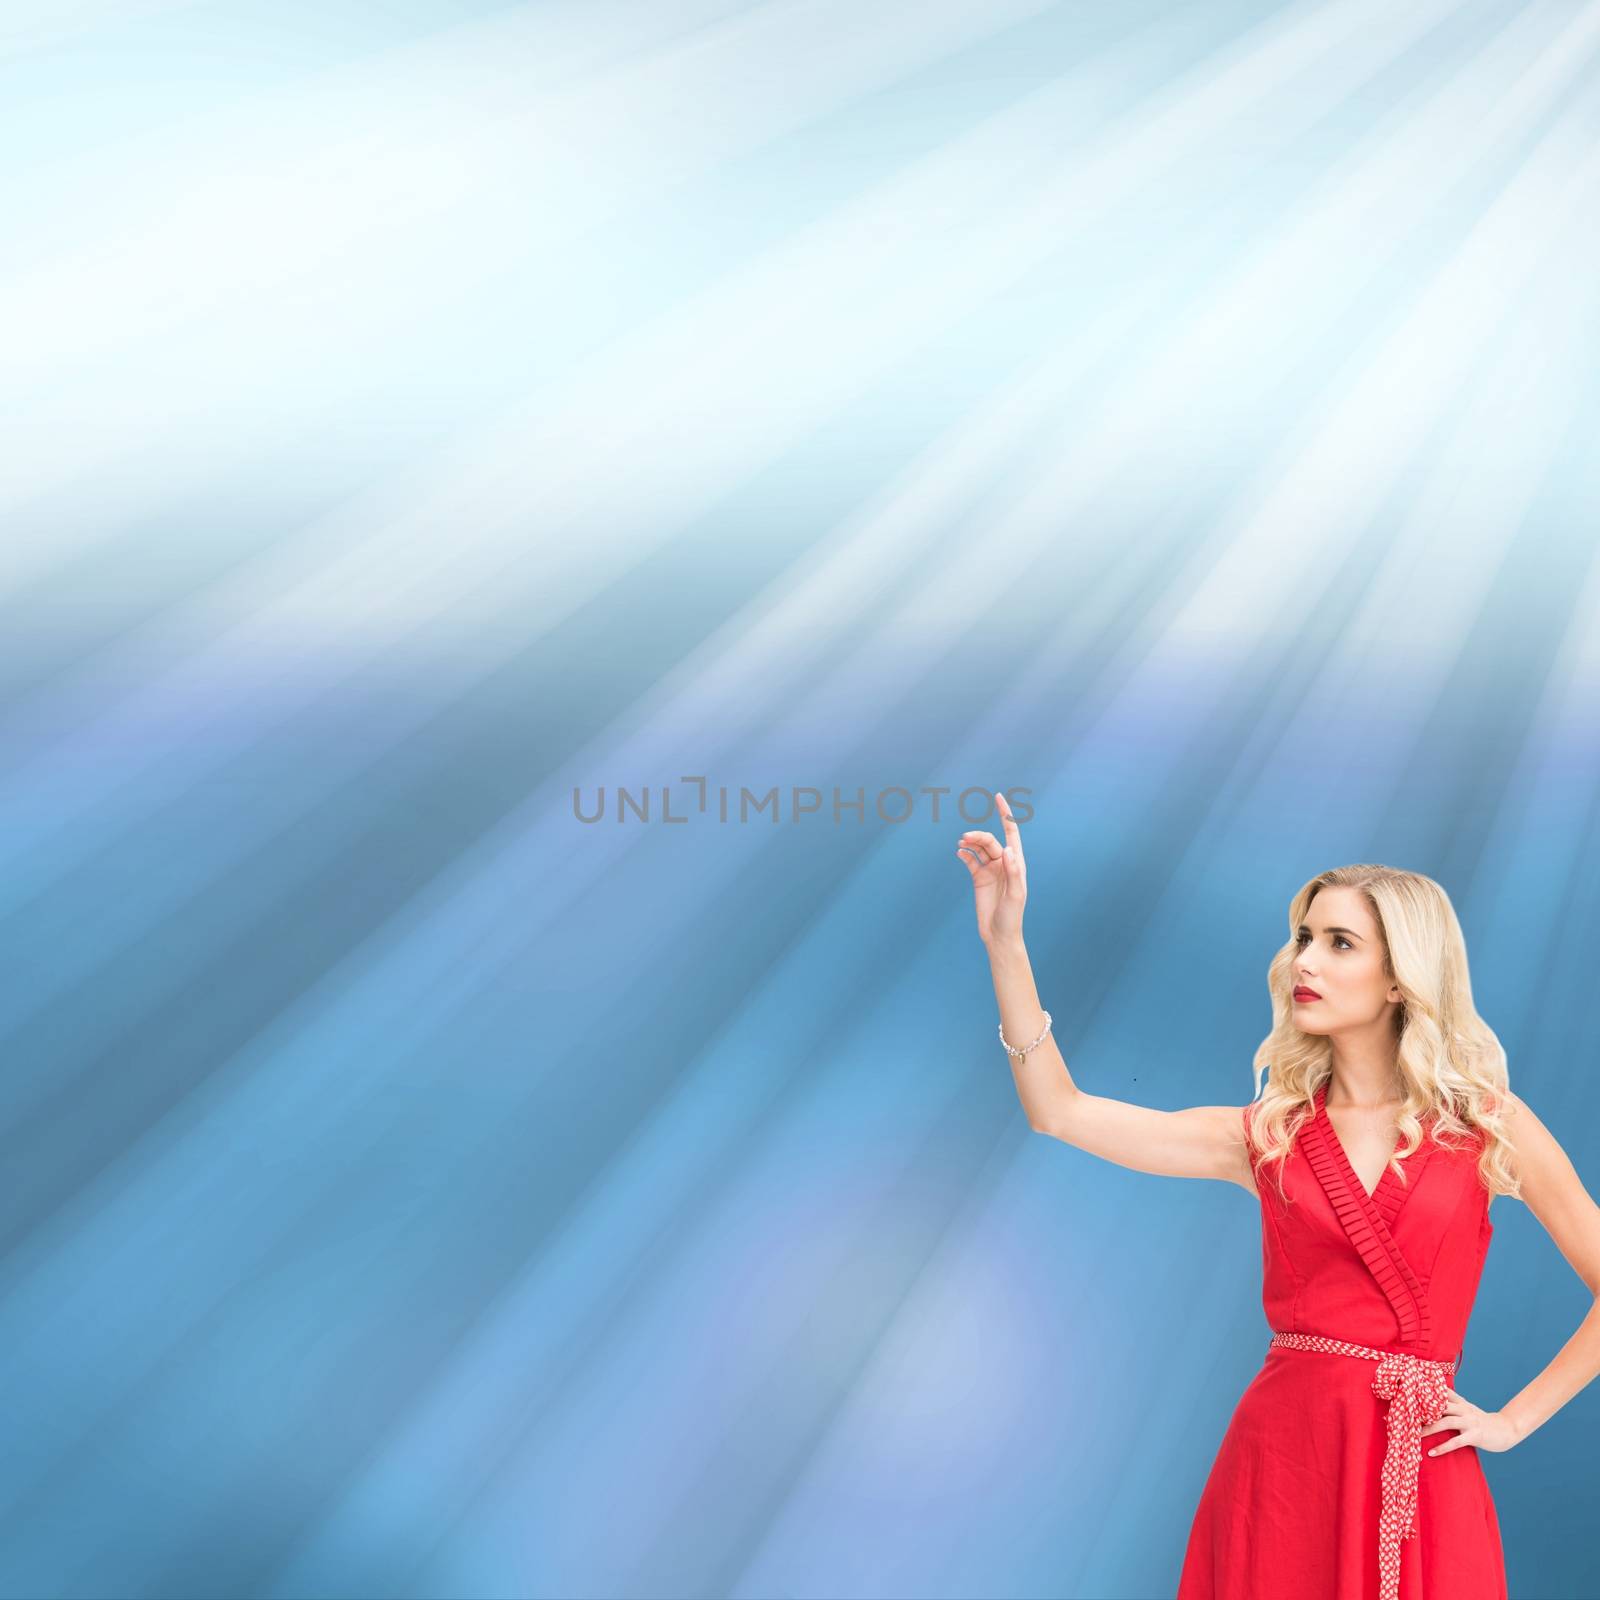 Composite image of cheerful woman in red dress pointing at something on shiny blue background